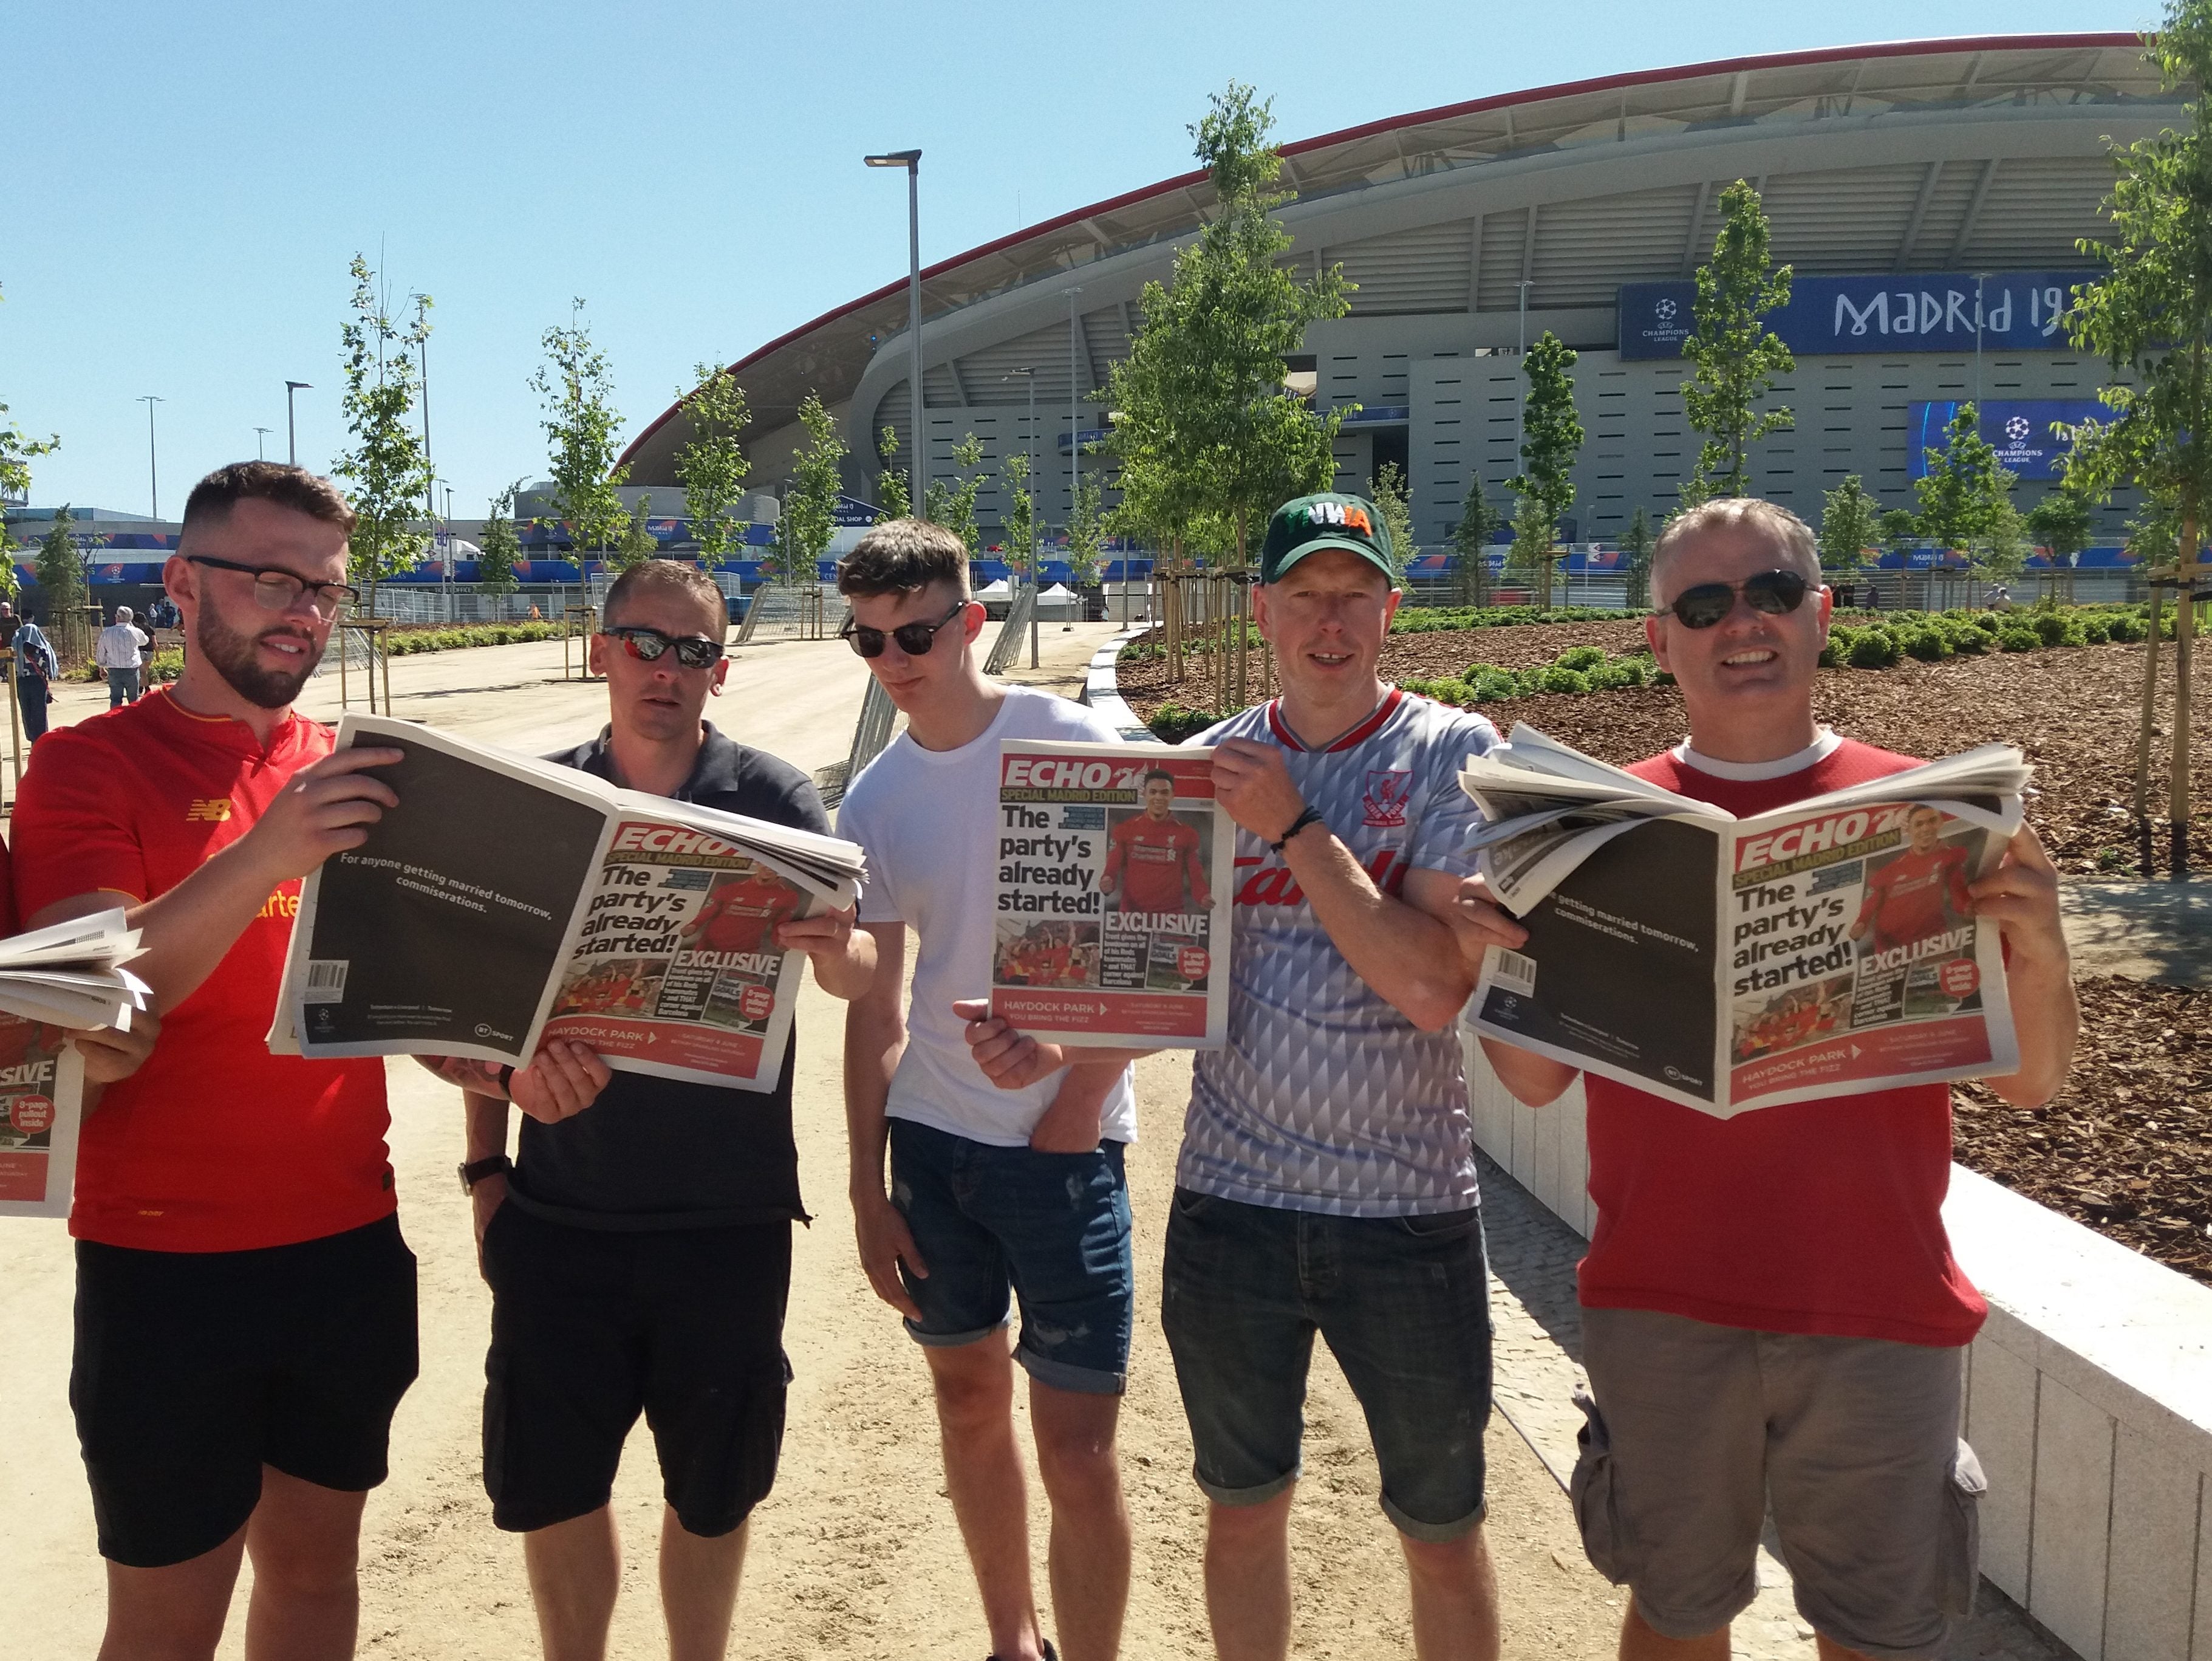 Liverpool Echo prints souvenir editions for fans in Madrid for Champions League final